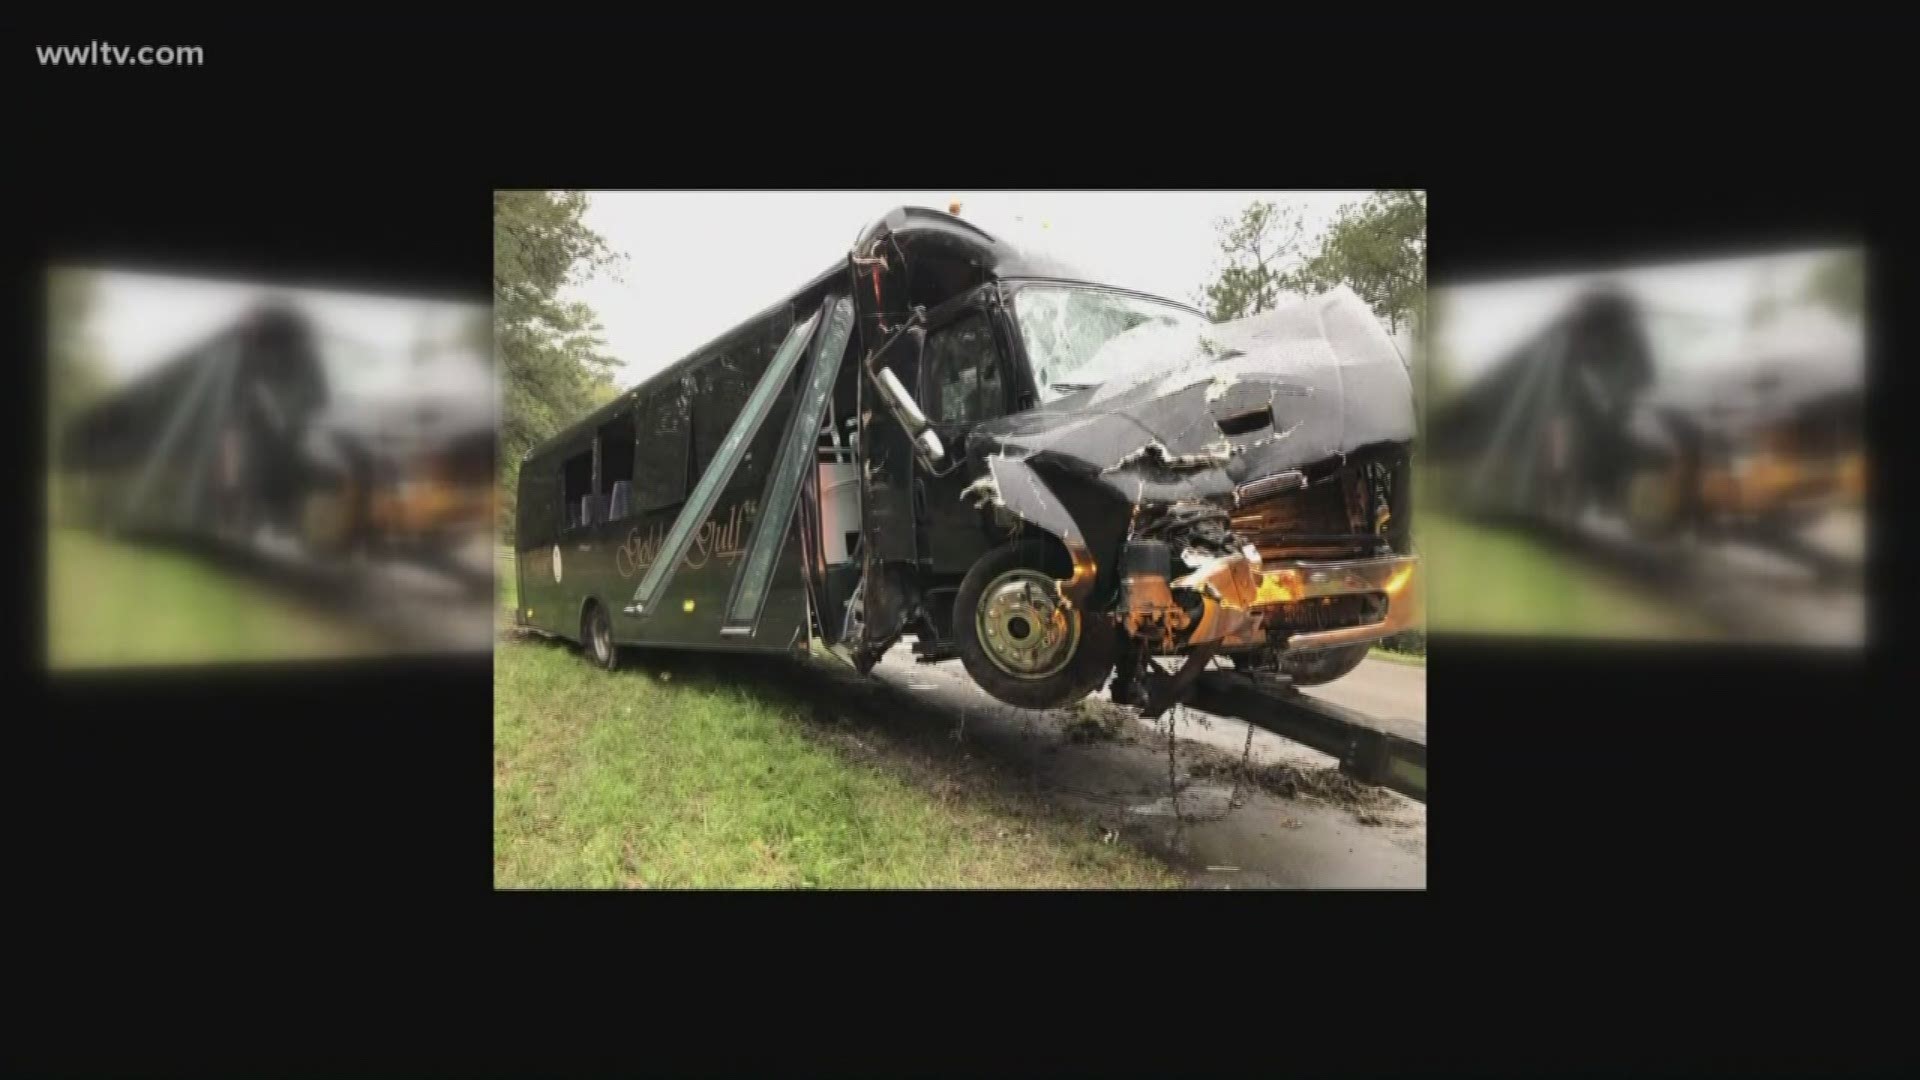 According to the Hancock County Sheriff, the bus ran off the interstate, hit a sign and then a tree.